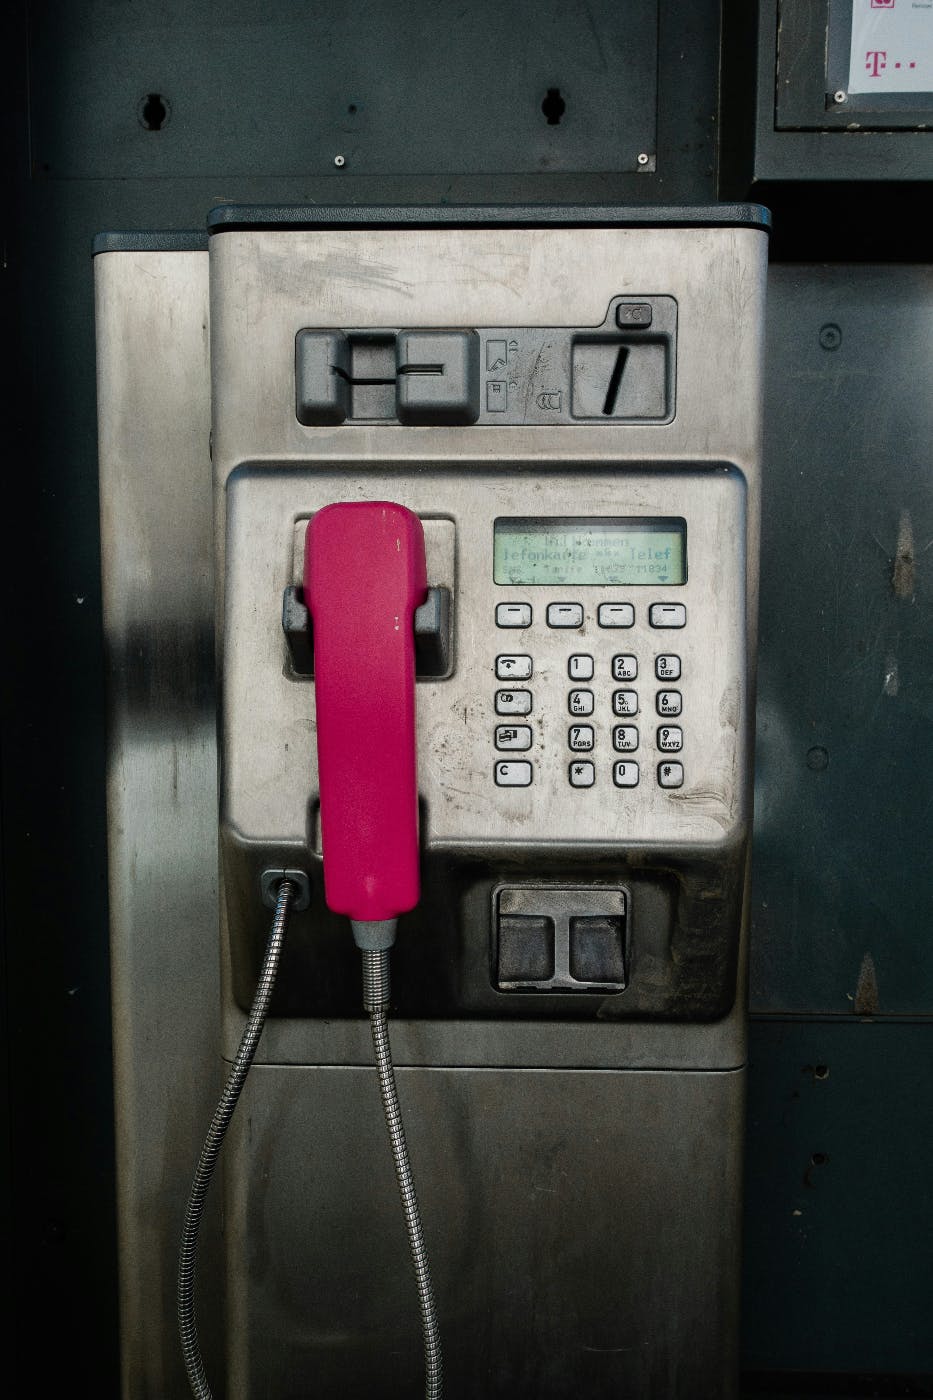 A payphone with a pink handset